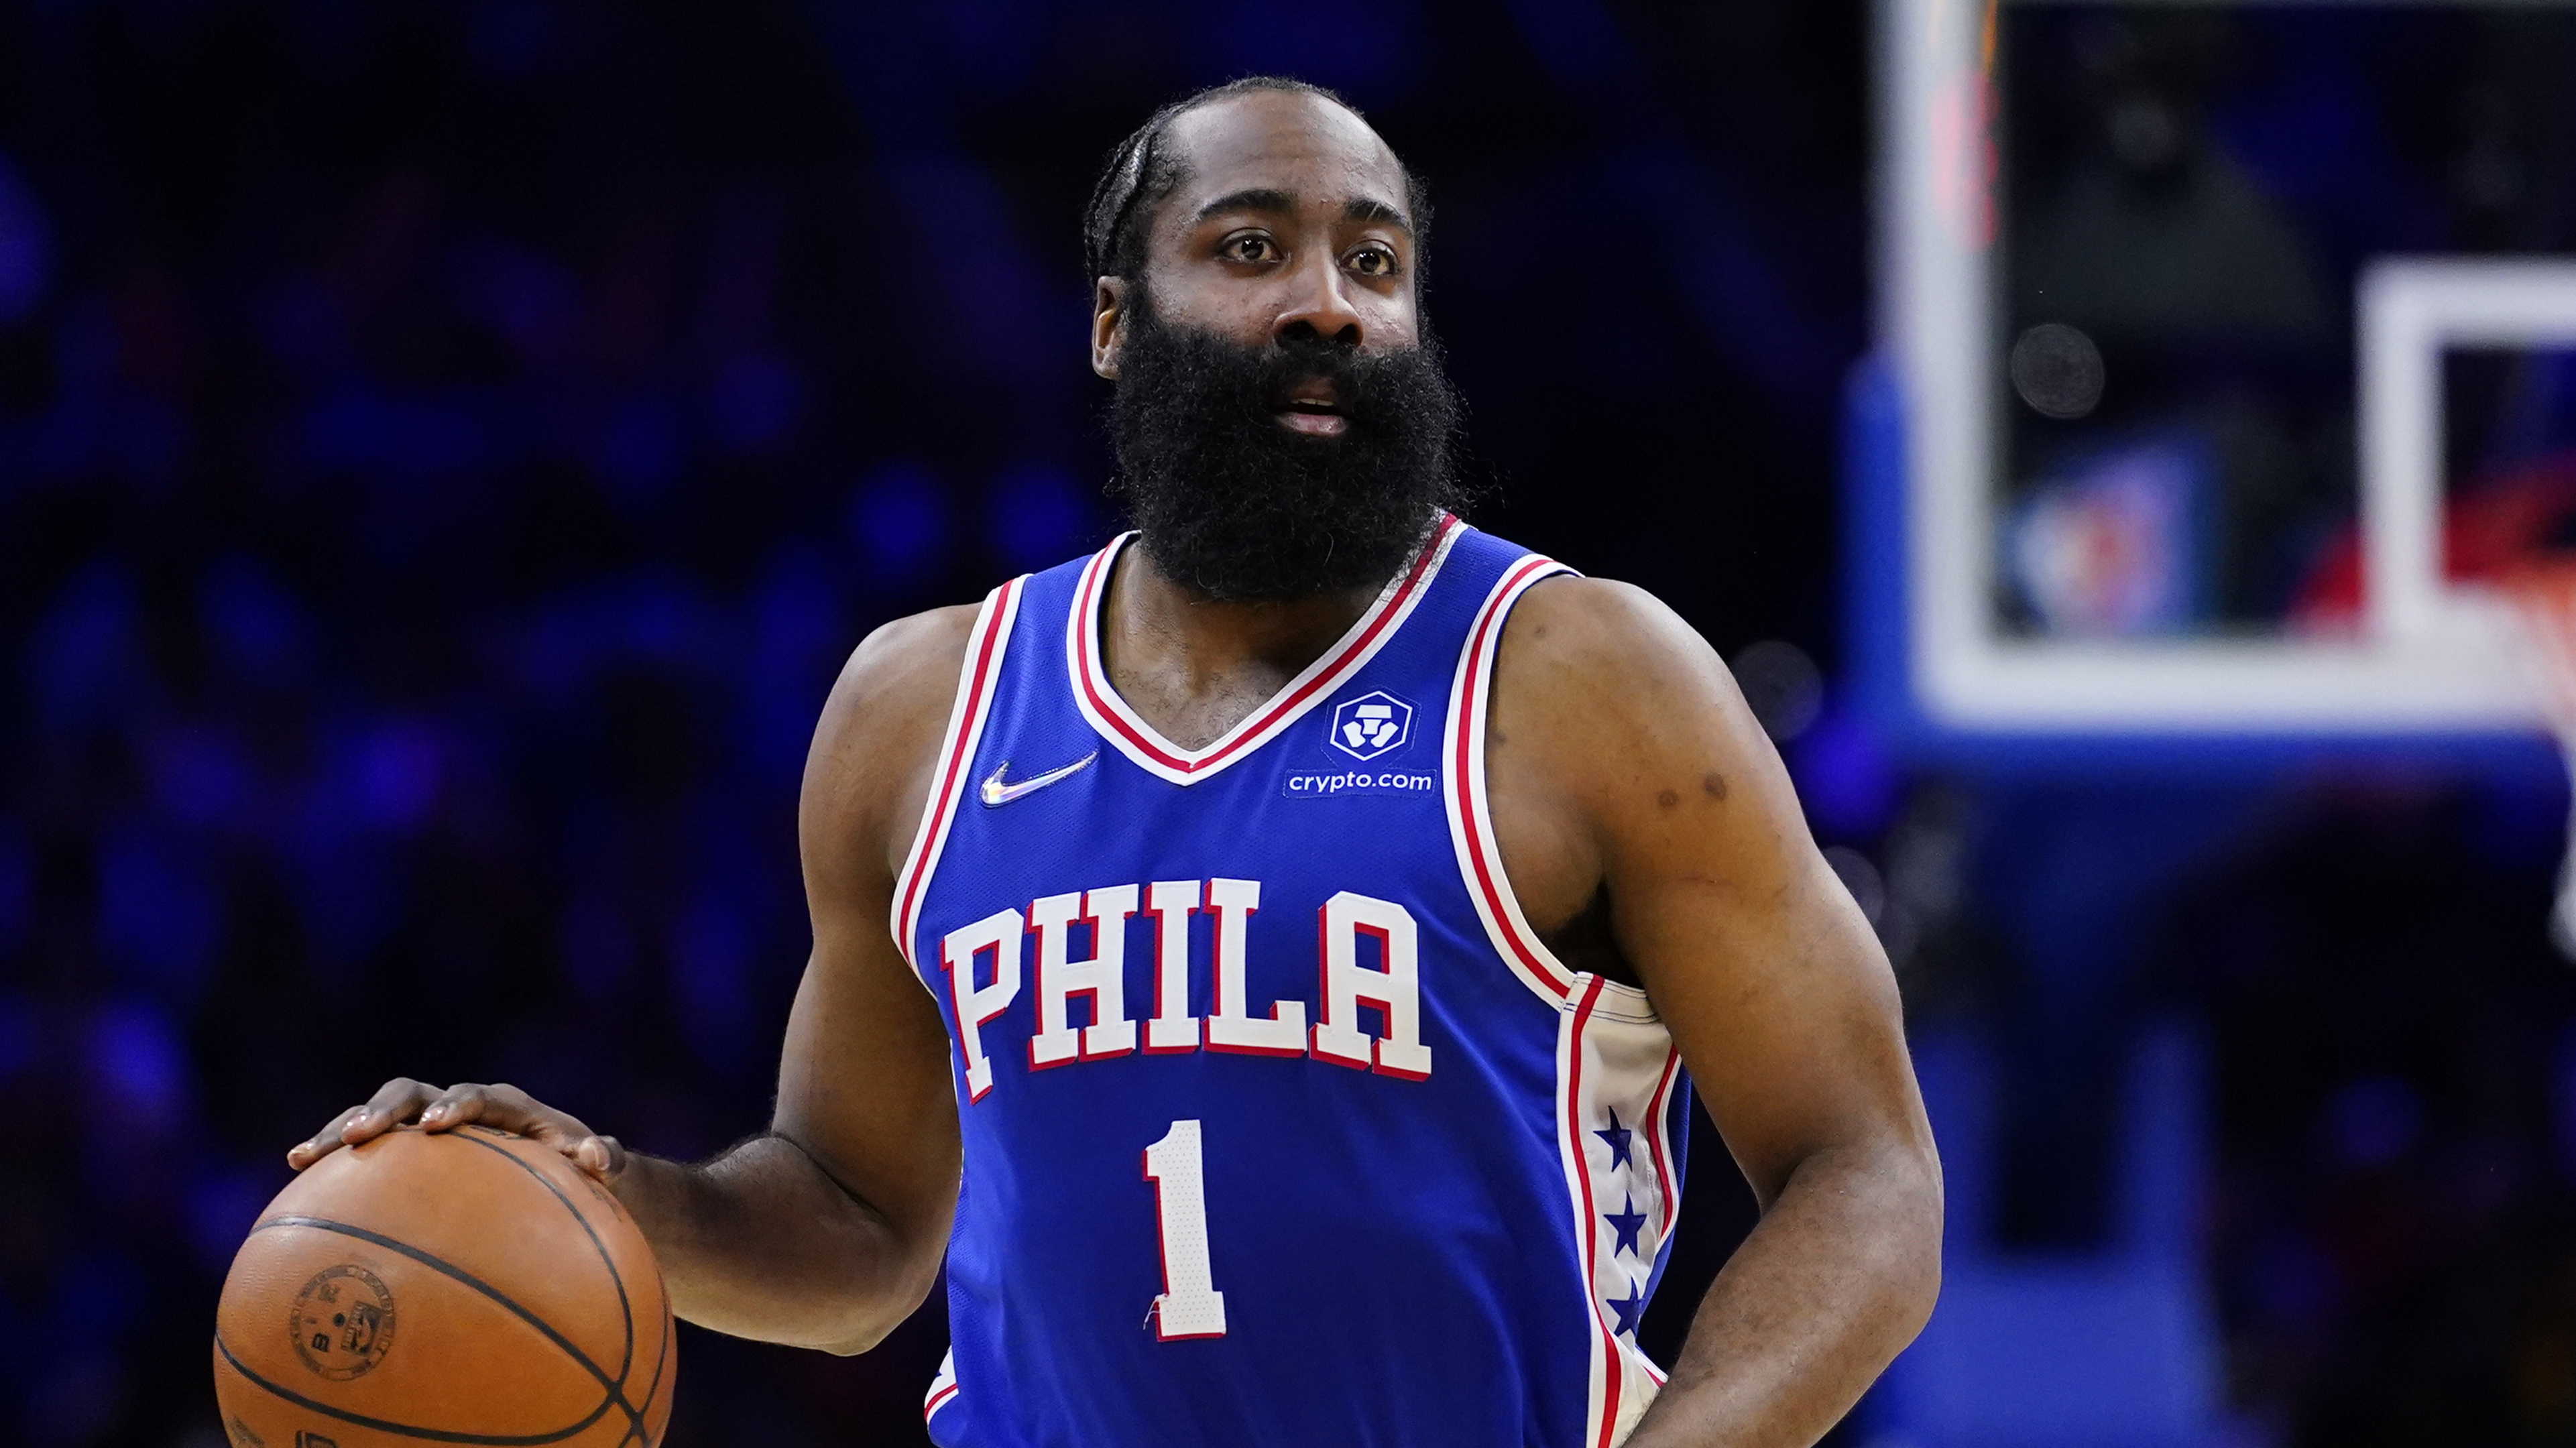 Sixers star James Harden gets absolutely roasted on Twitter over